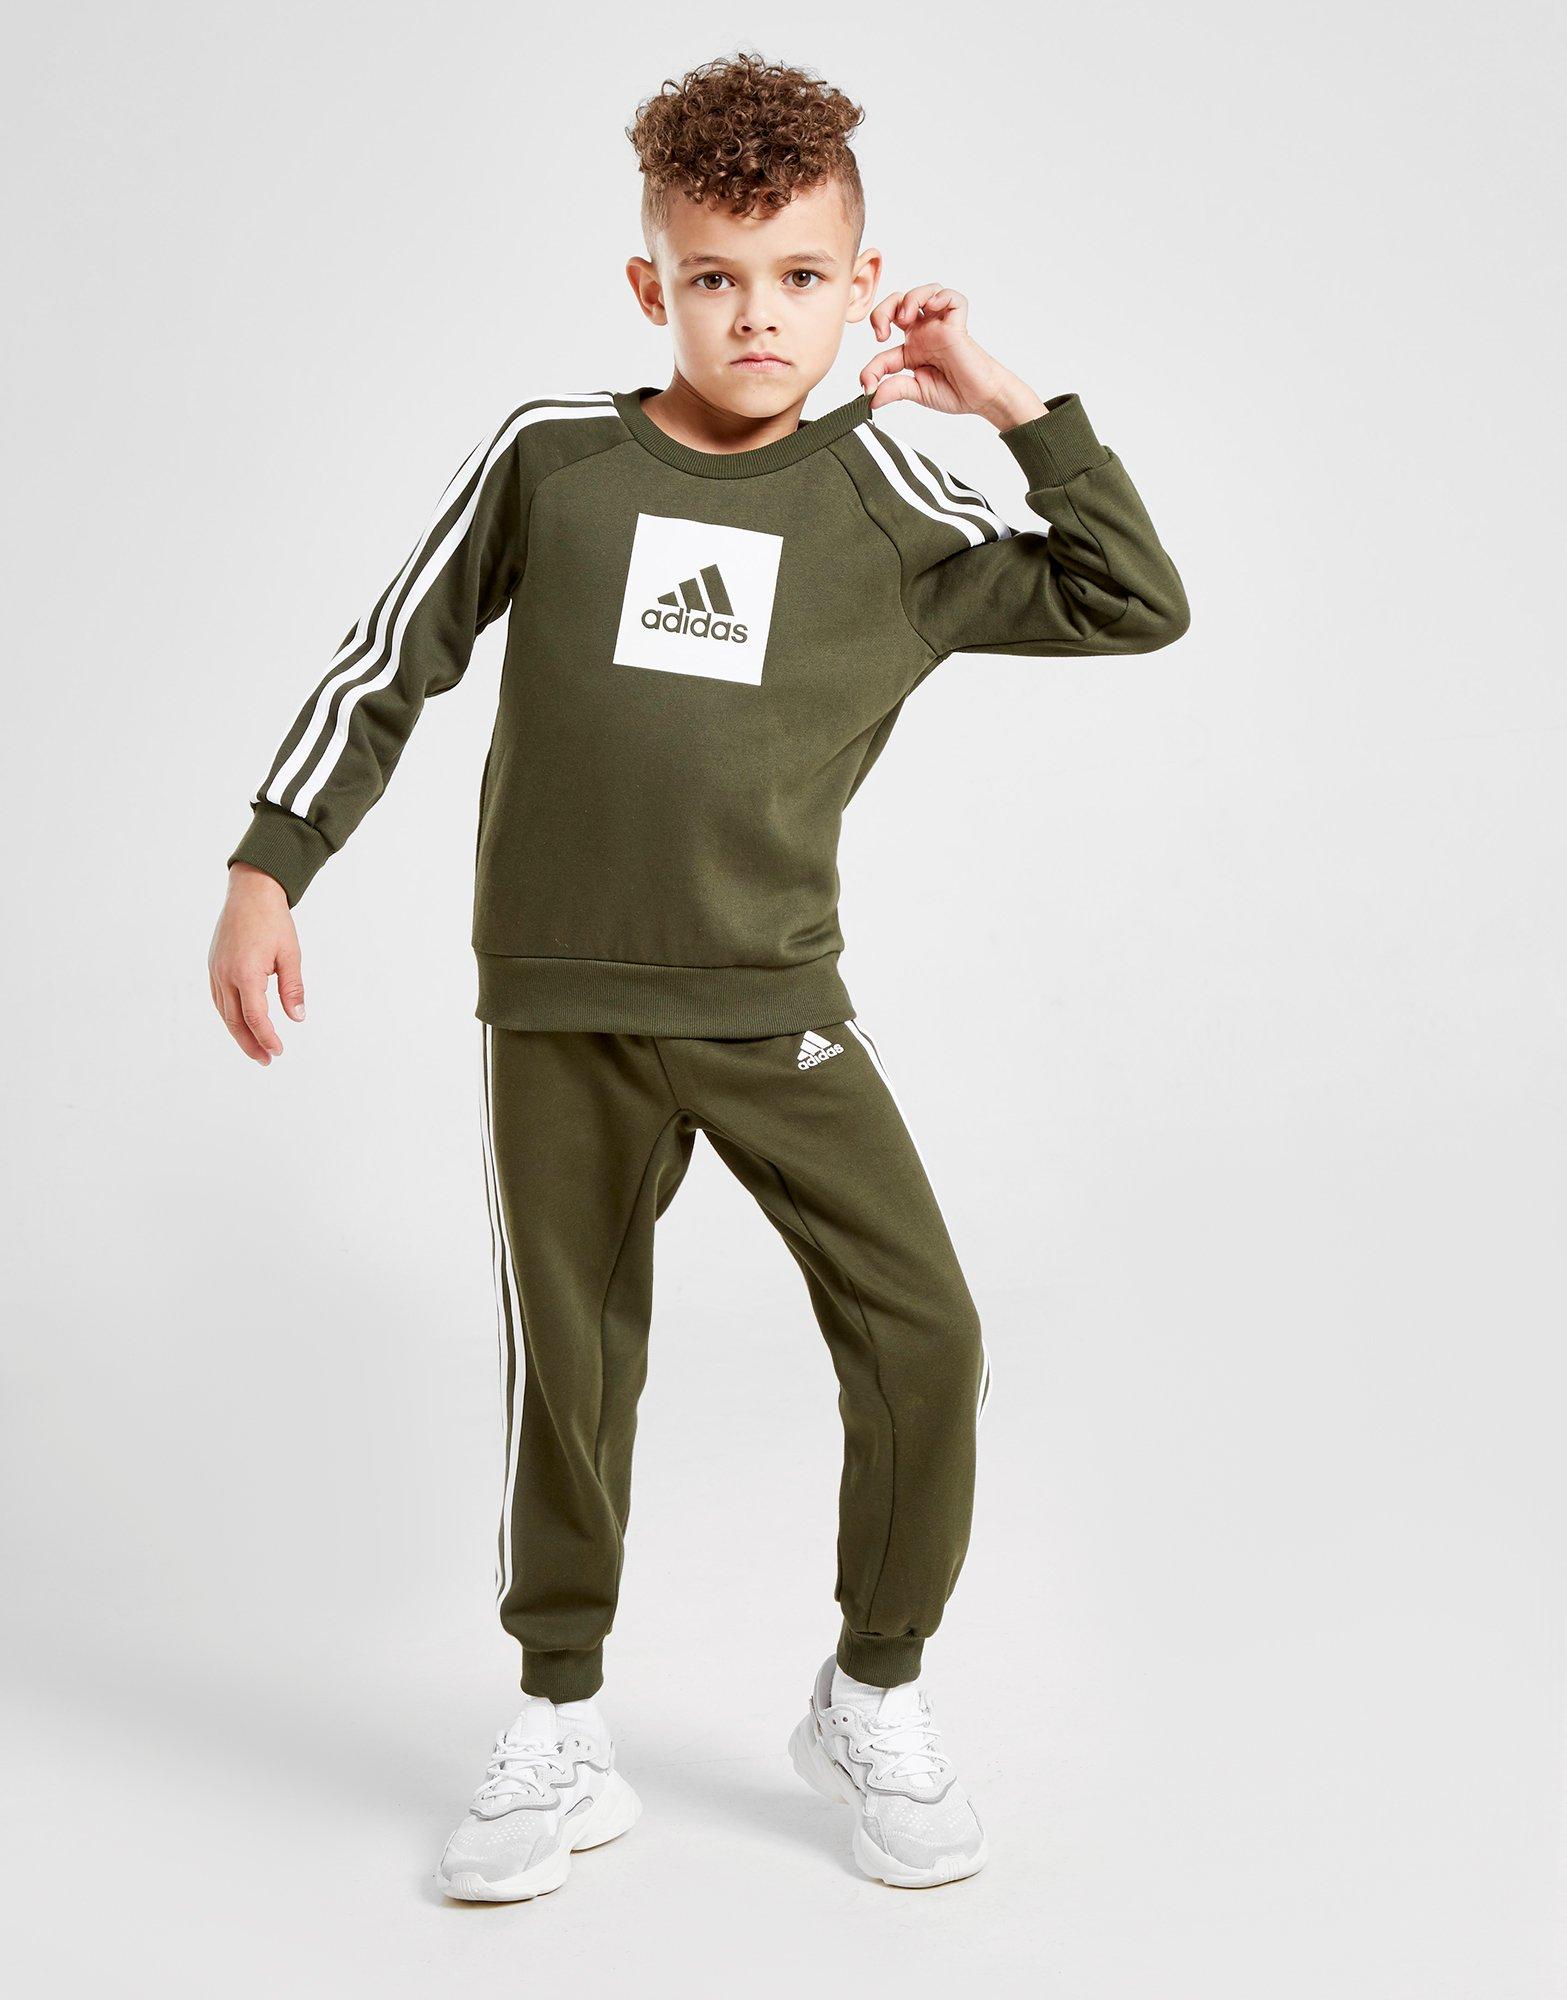 adidas gazelle mens outfit